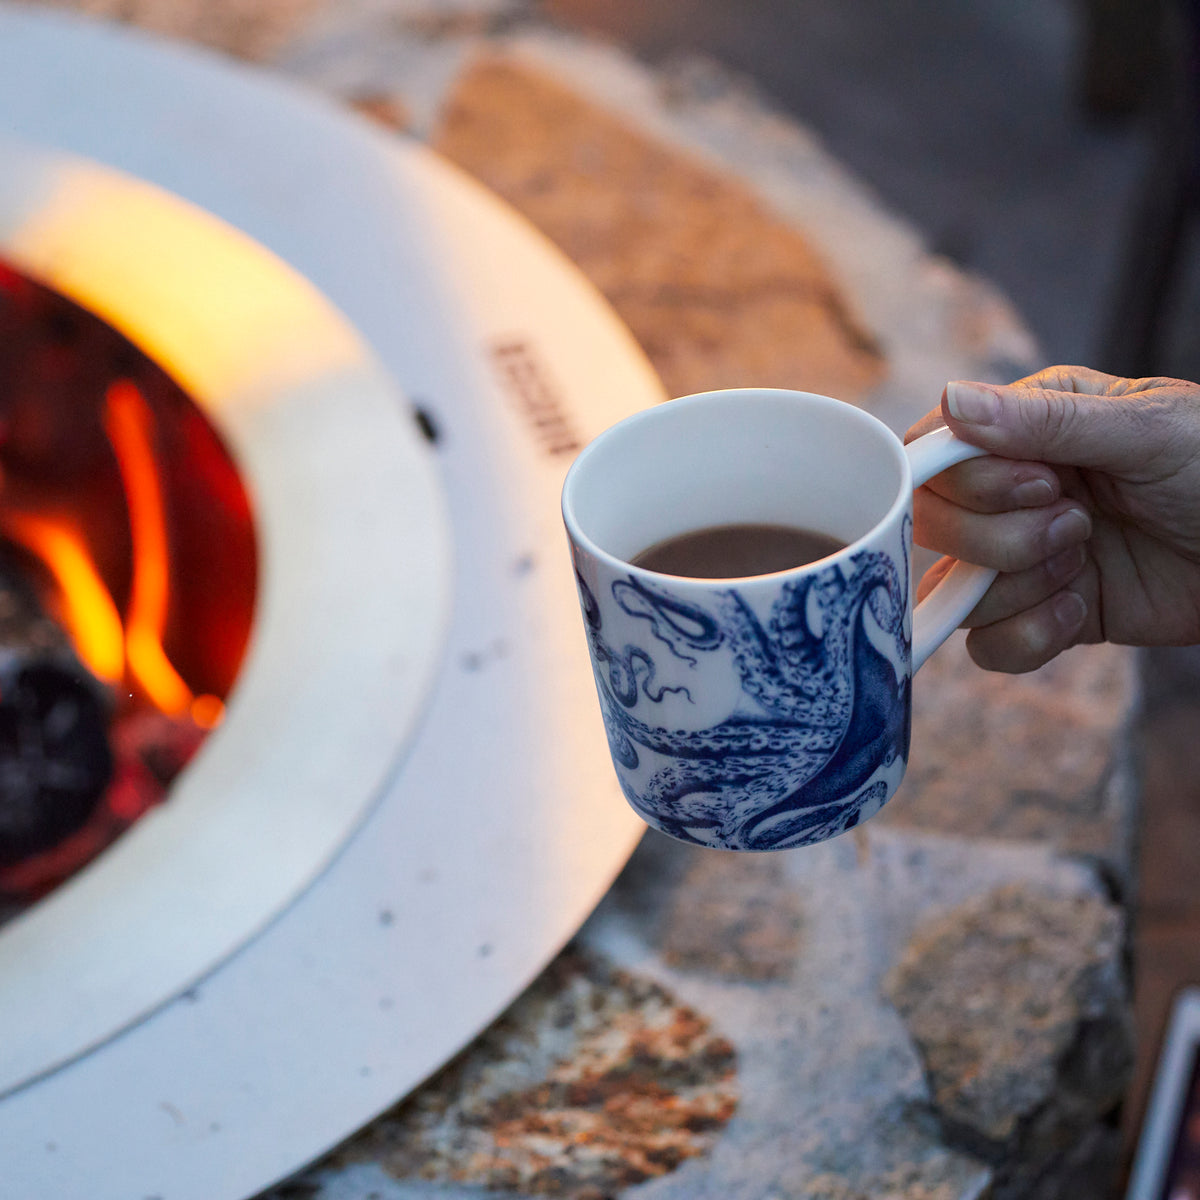 A hand holding a Lucy Mug with blue designs, crafted from premium porcelain by Caskata Artisanal Home, near a stone fire pit emitting a warm glow.